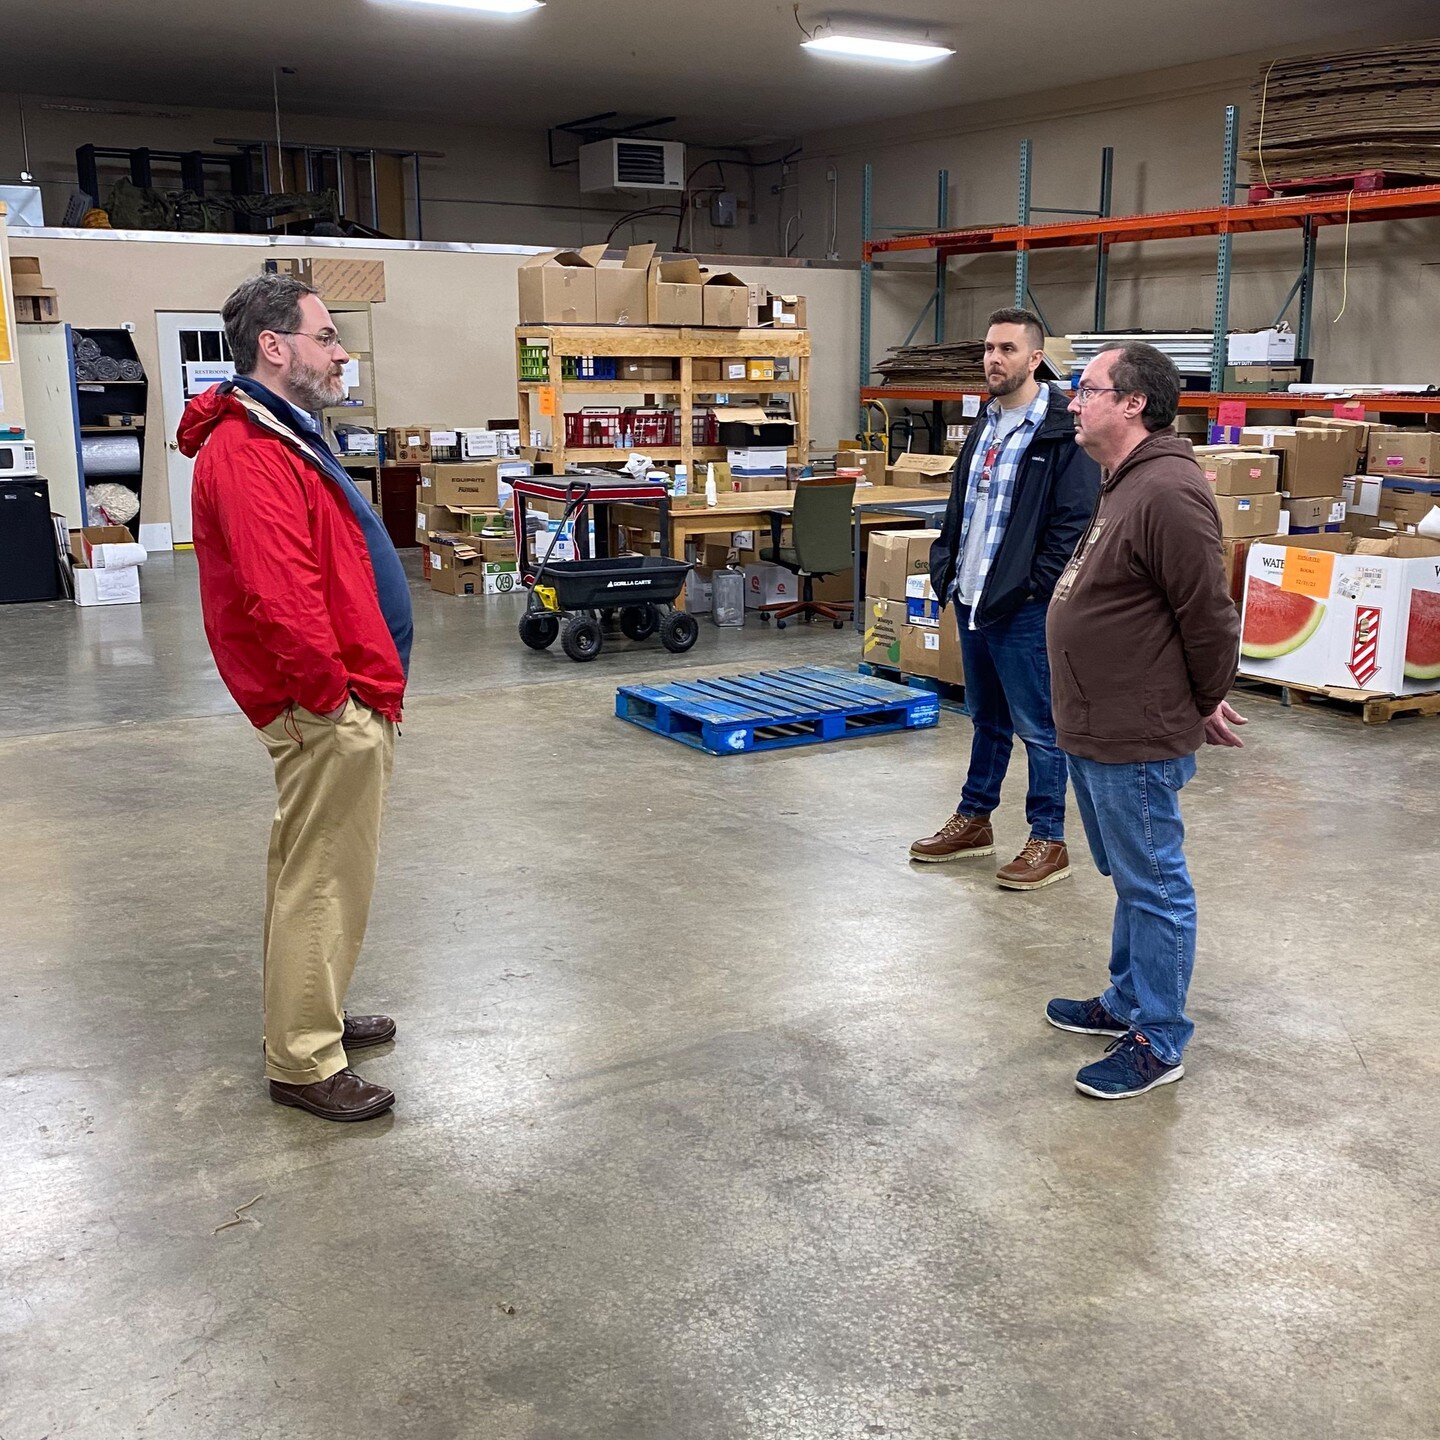 Last week David toured the Hoosier Hills Food Bank. When it comes to funding our values, organizations like Hoosier Hills Food Bank are on the front lines of supporting those in need. Programs like the county&rsquo;s Sophia Travis Grant Program provi